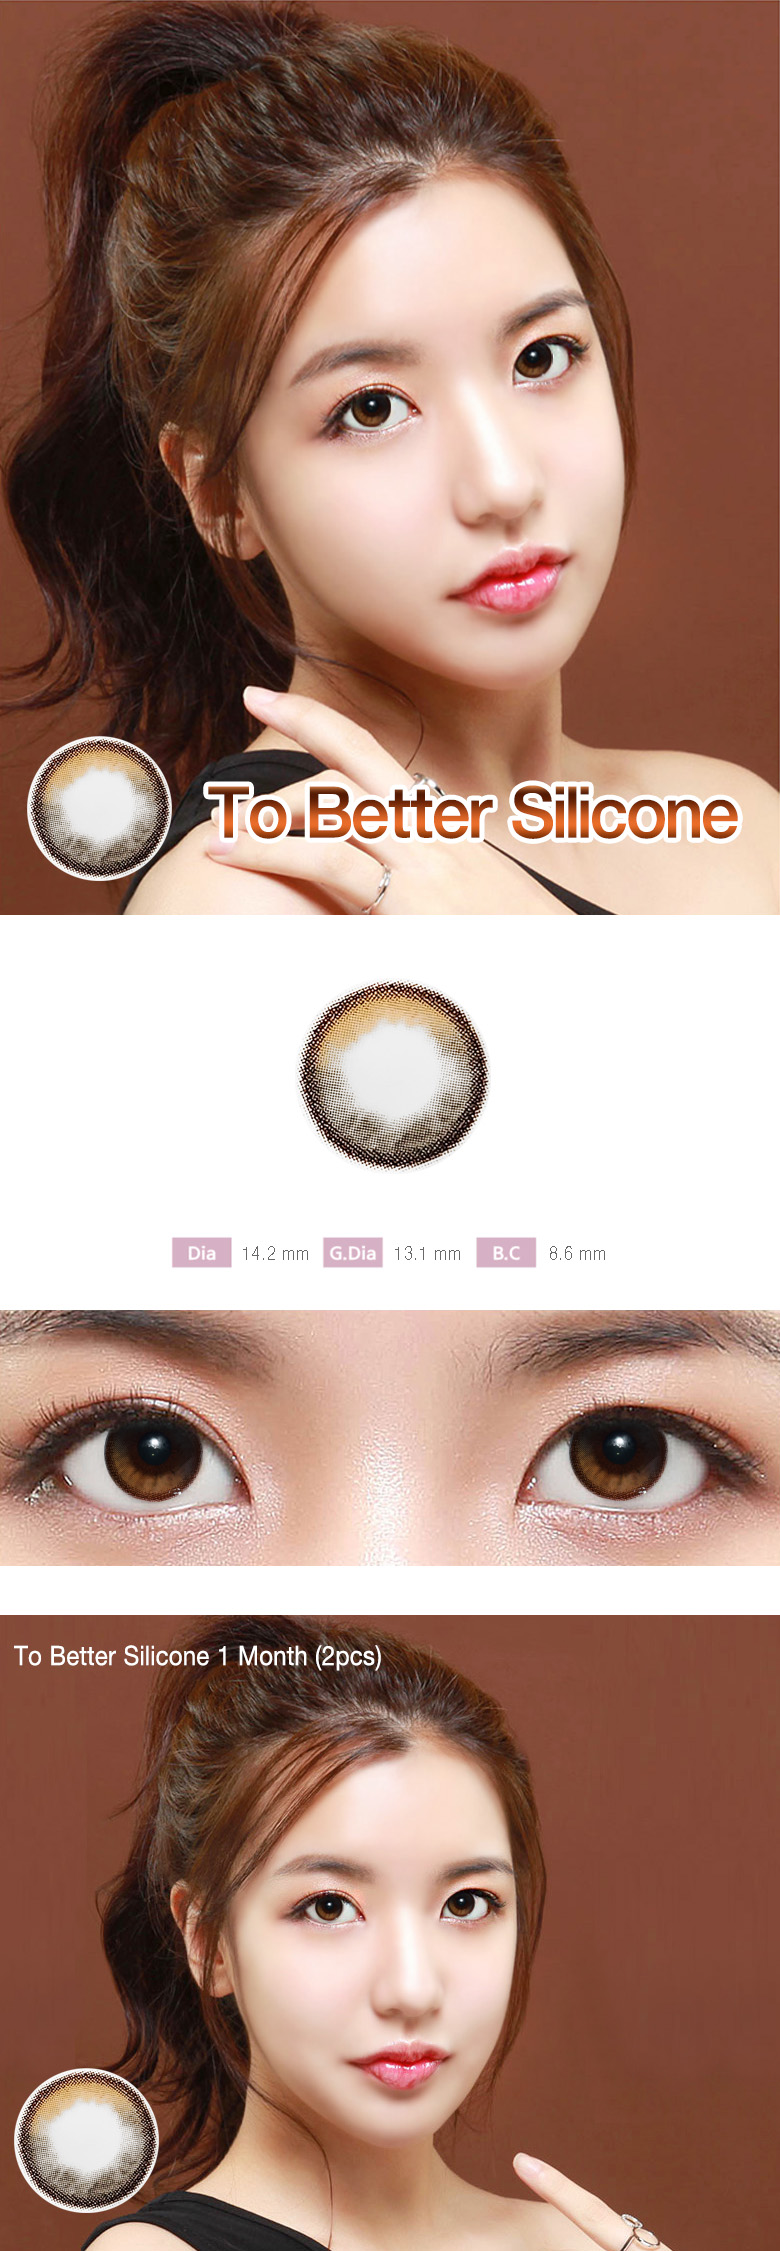 [1 Month/ブラウン/BROWN] ツーベター シリコン 1ヶ月 - To Better Silicone - 1 Month (2pcs) [14.2mm]